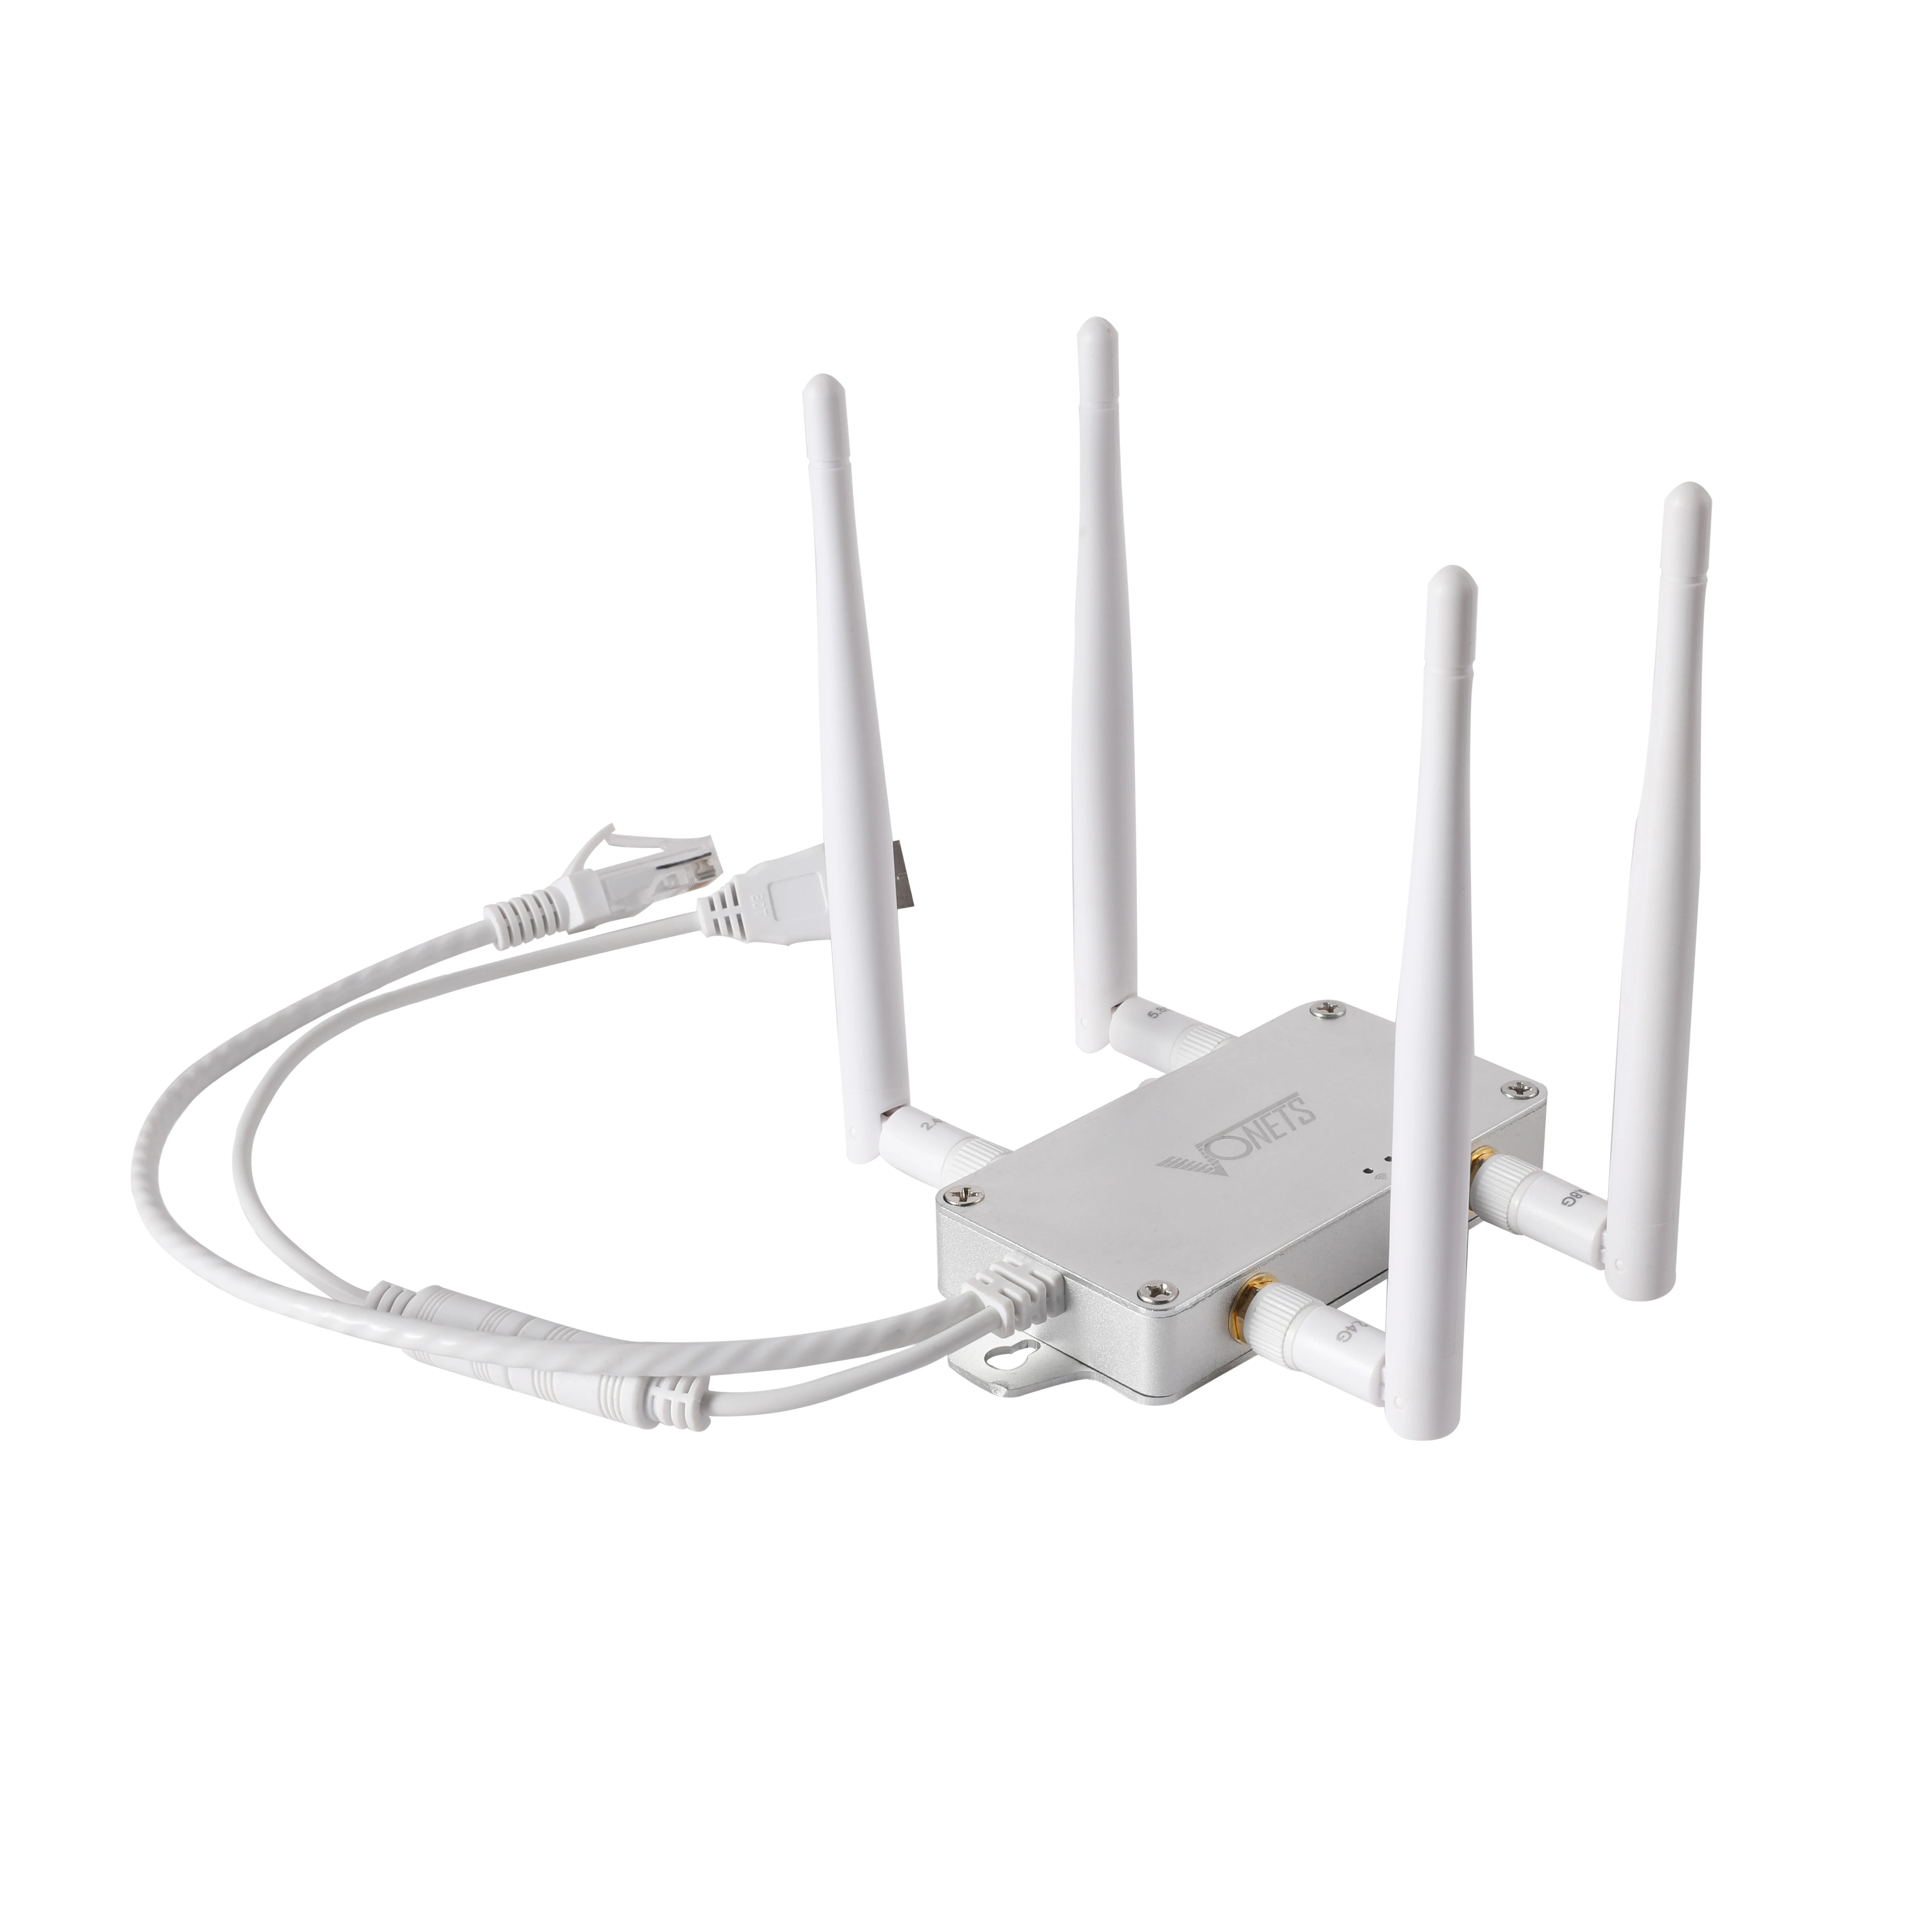 Dual Band 2.4G/5G VBG1200 WiFi Bridge Wireless Repeater/Router Ethernet to Wifi for Video Transmission DVR PS3 Monitor New